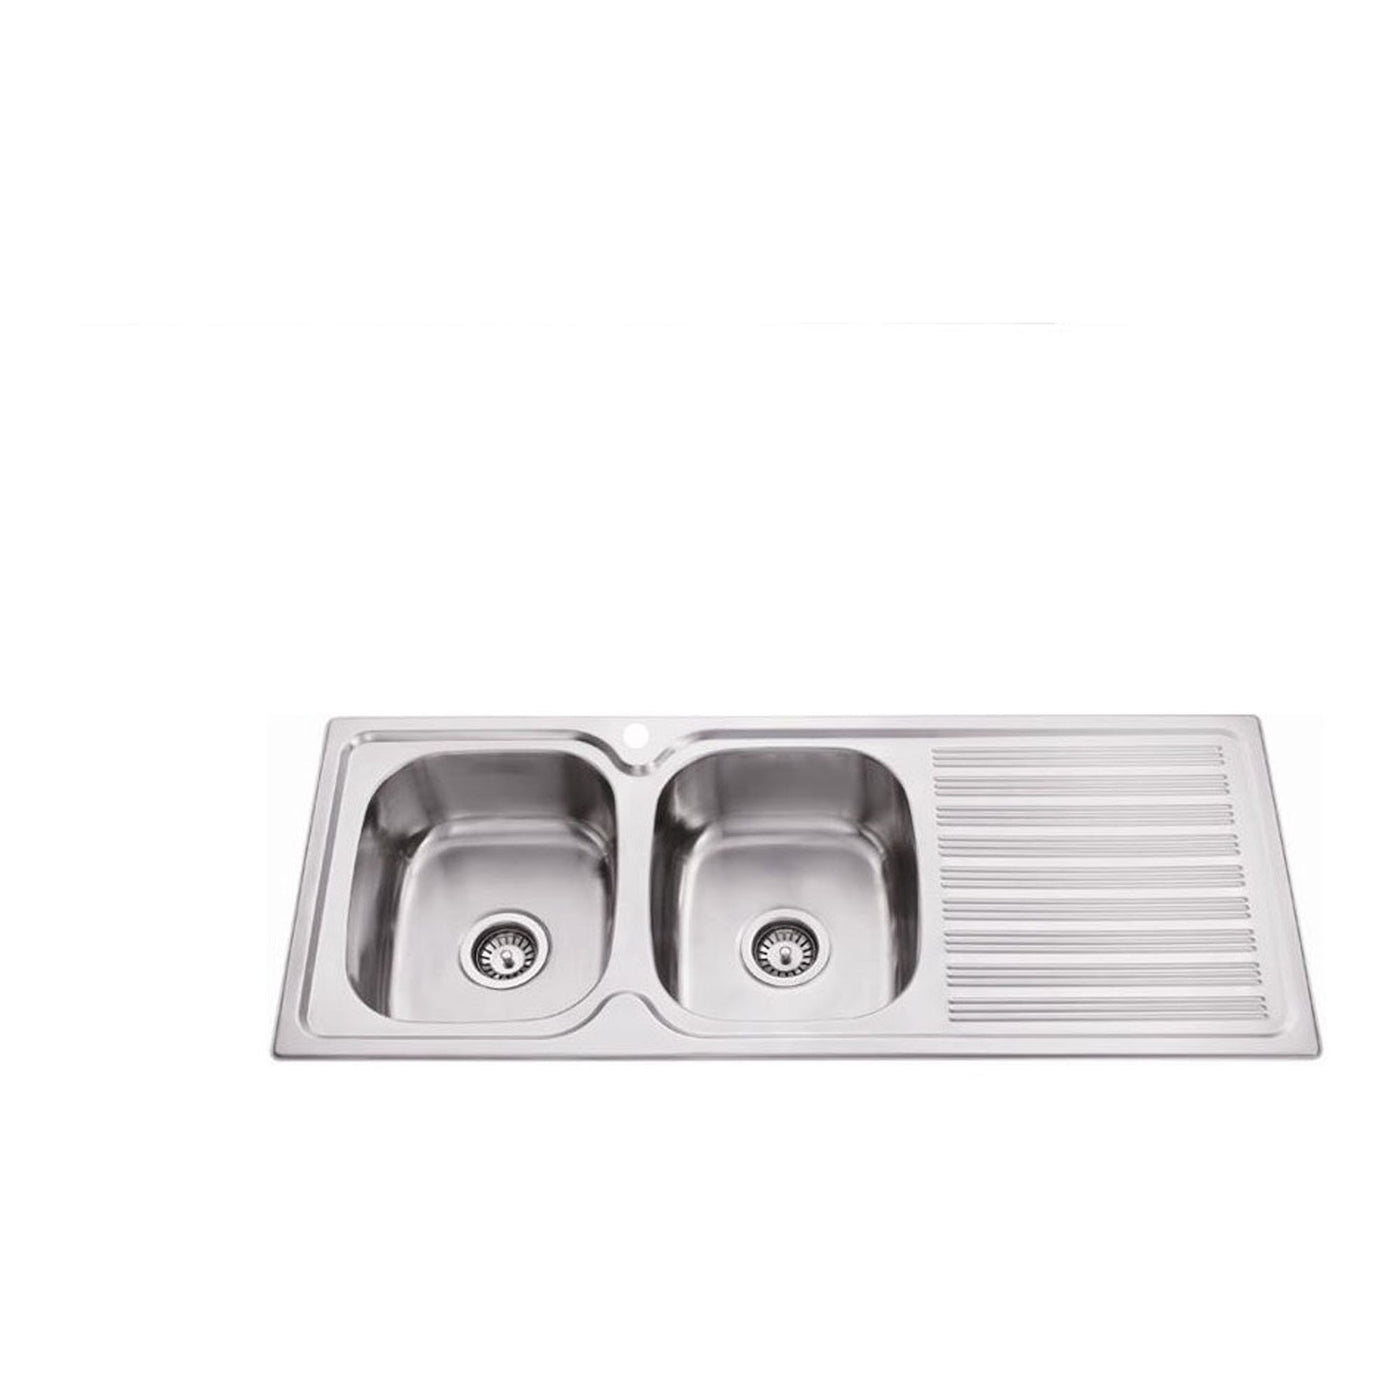 Ground Double Bowl Sink